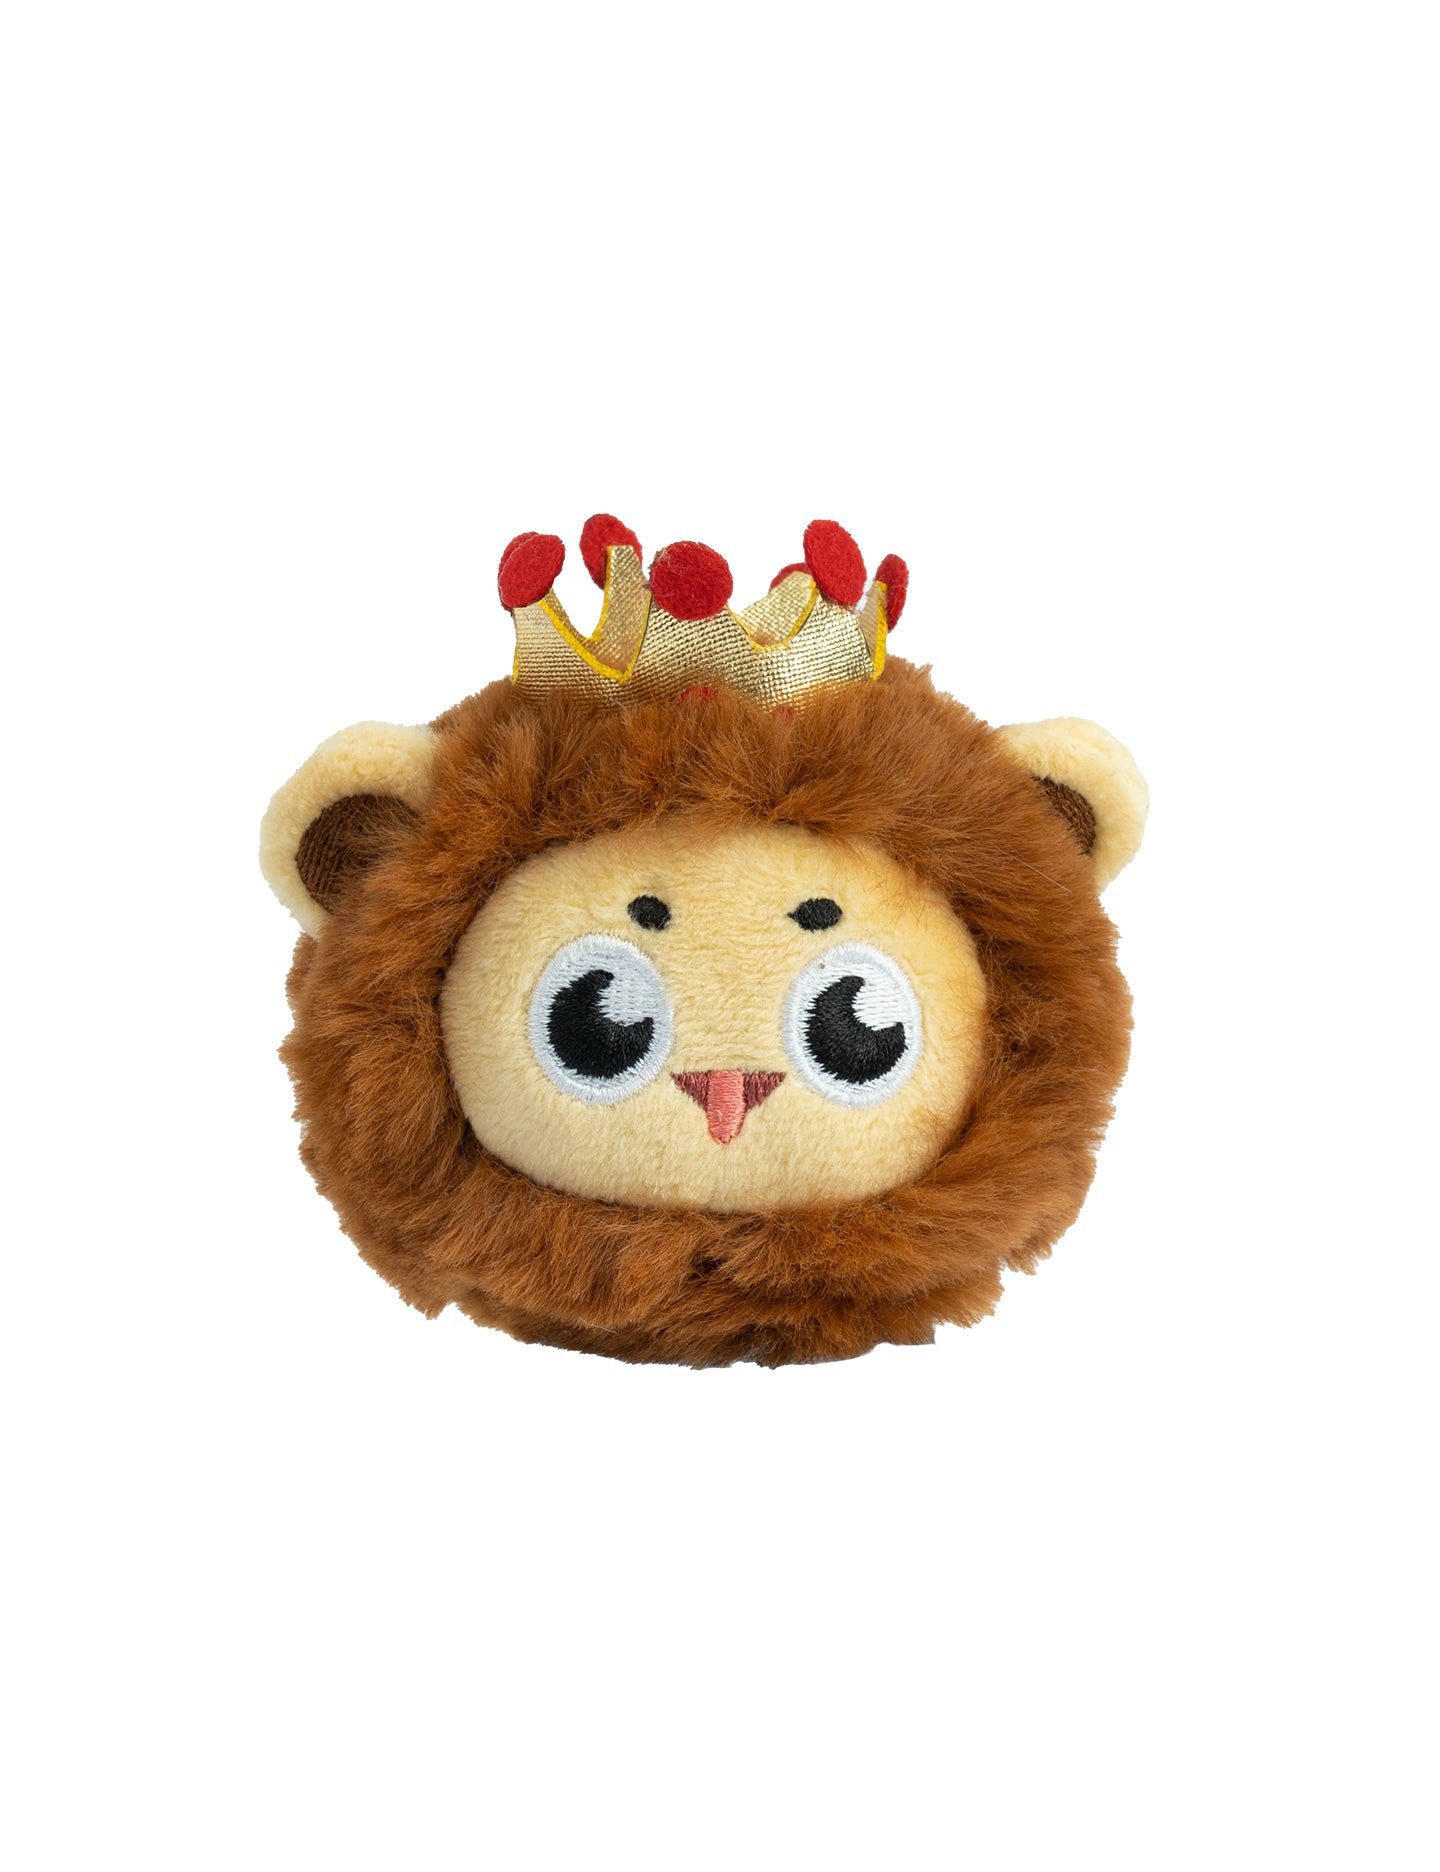 Race Clicker Got Toy Royal Lion Plushie Today